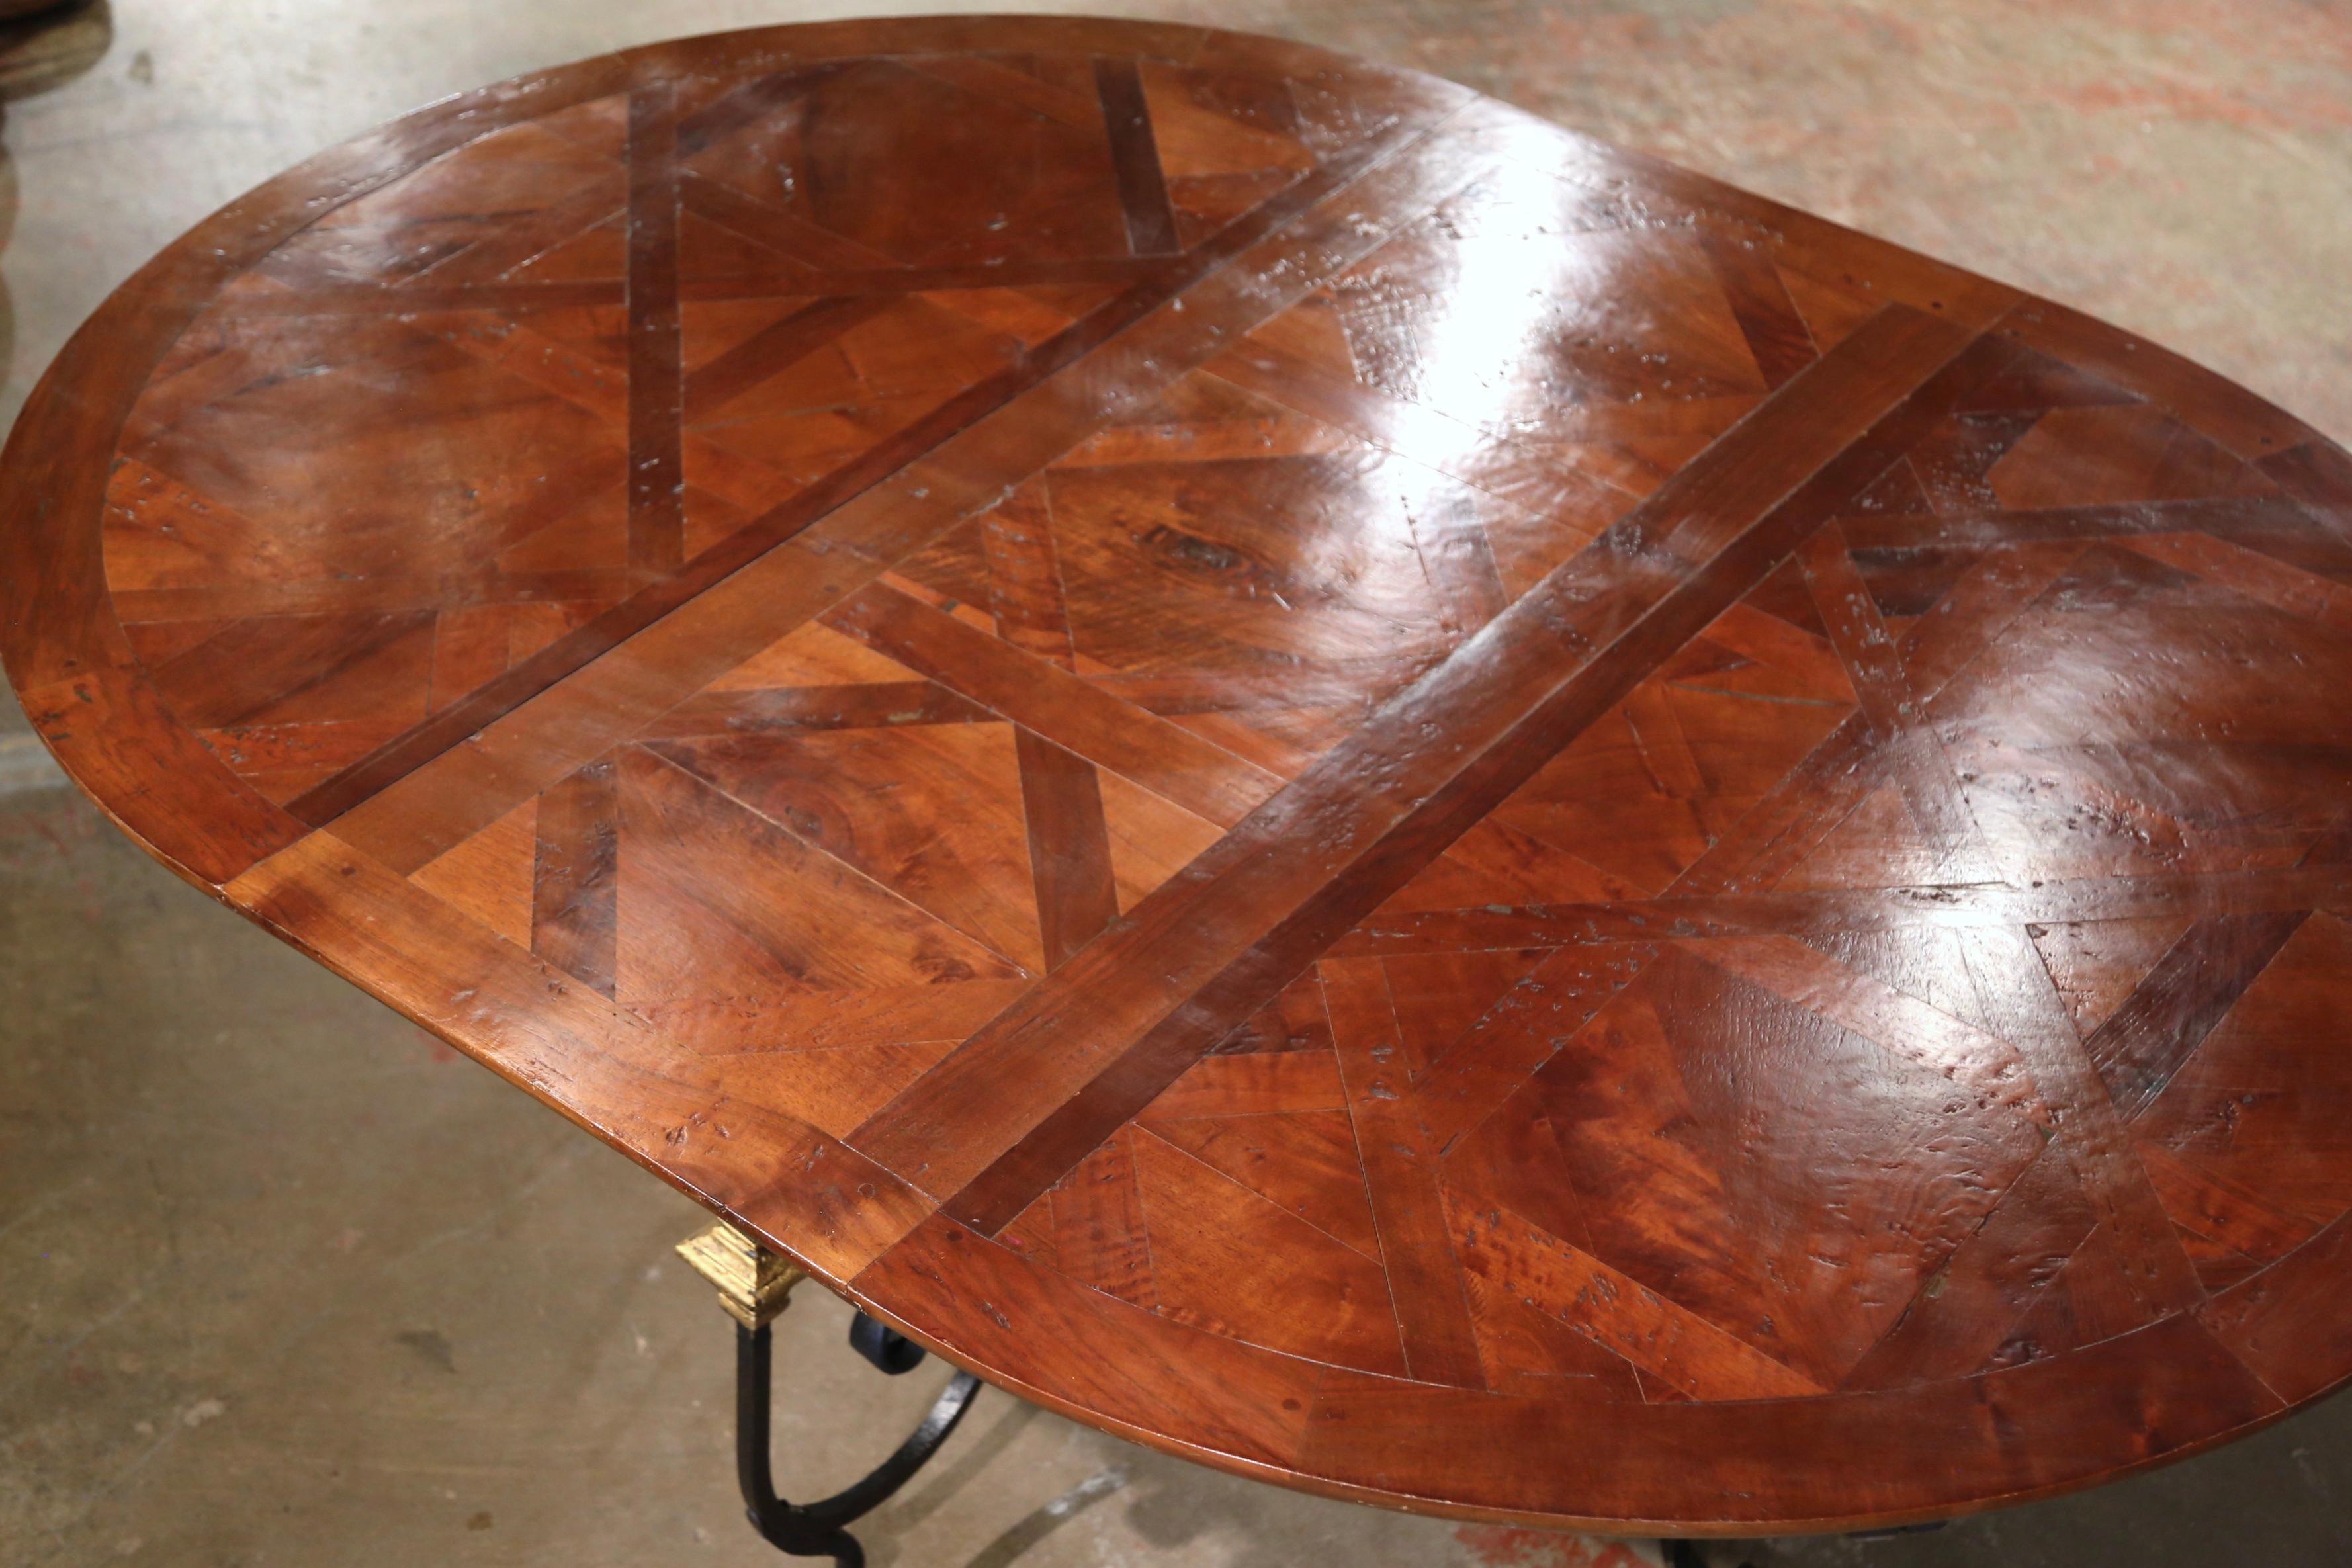 Forged Mid-Century French Carved Walnut Dining Room Table on Wrought Iron Base w/ Leaf